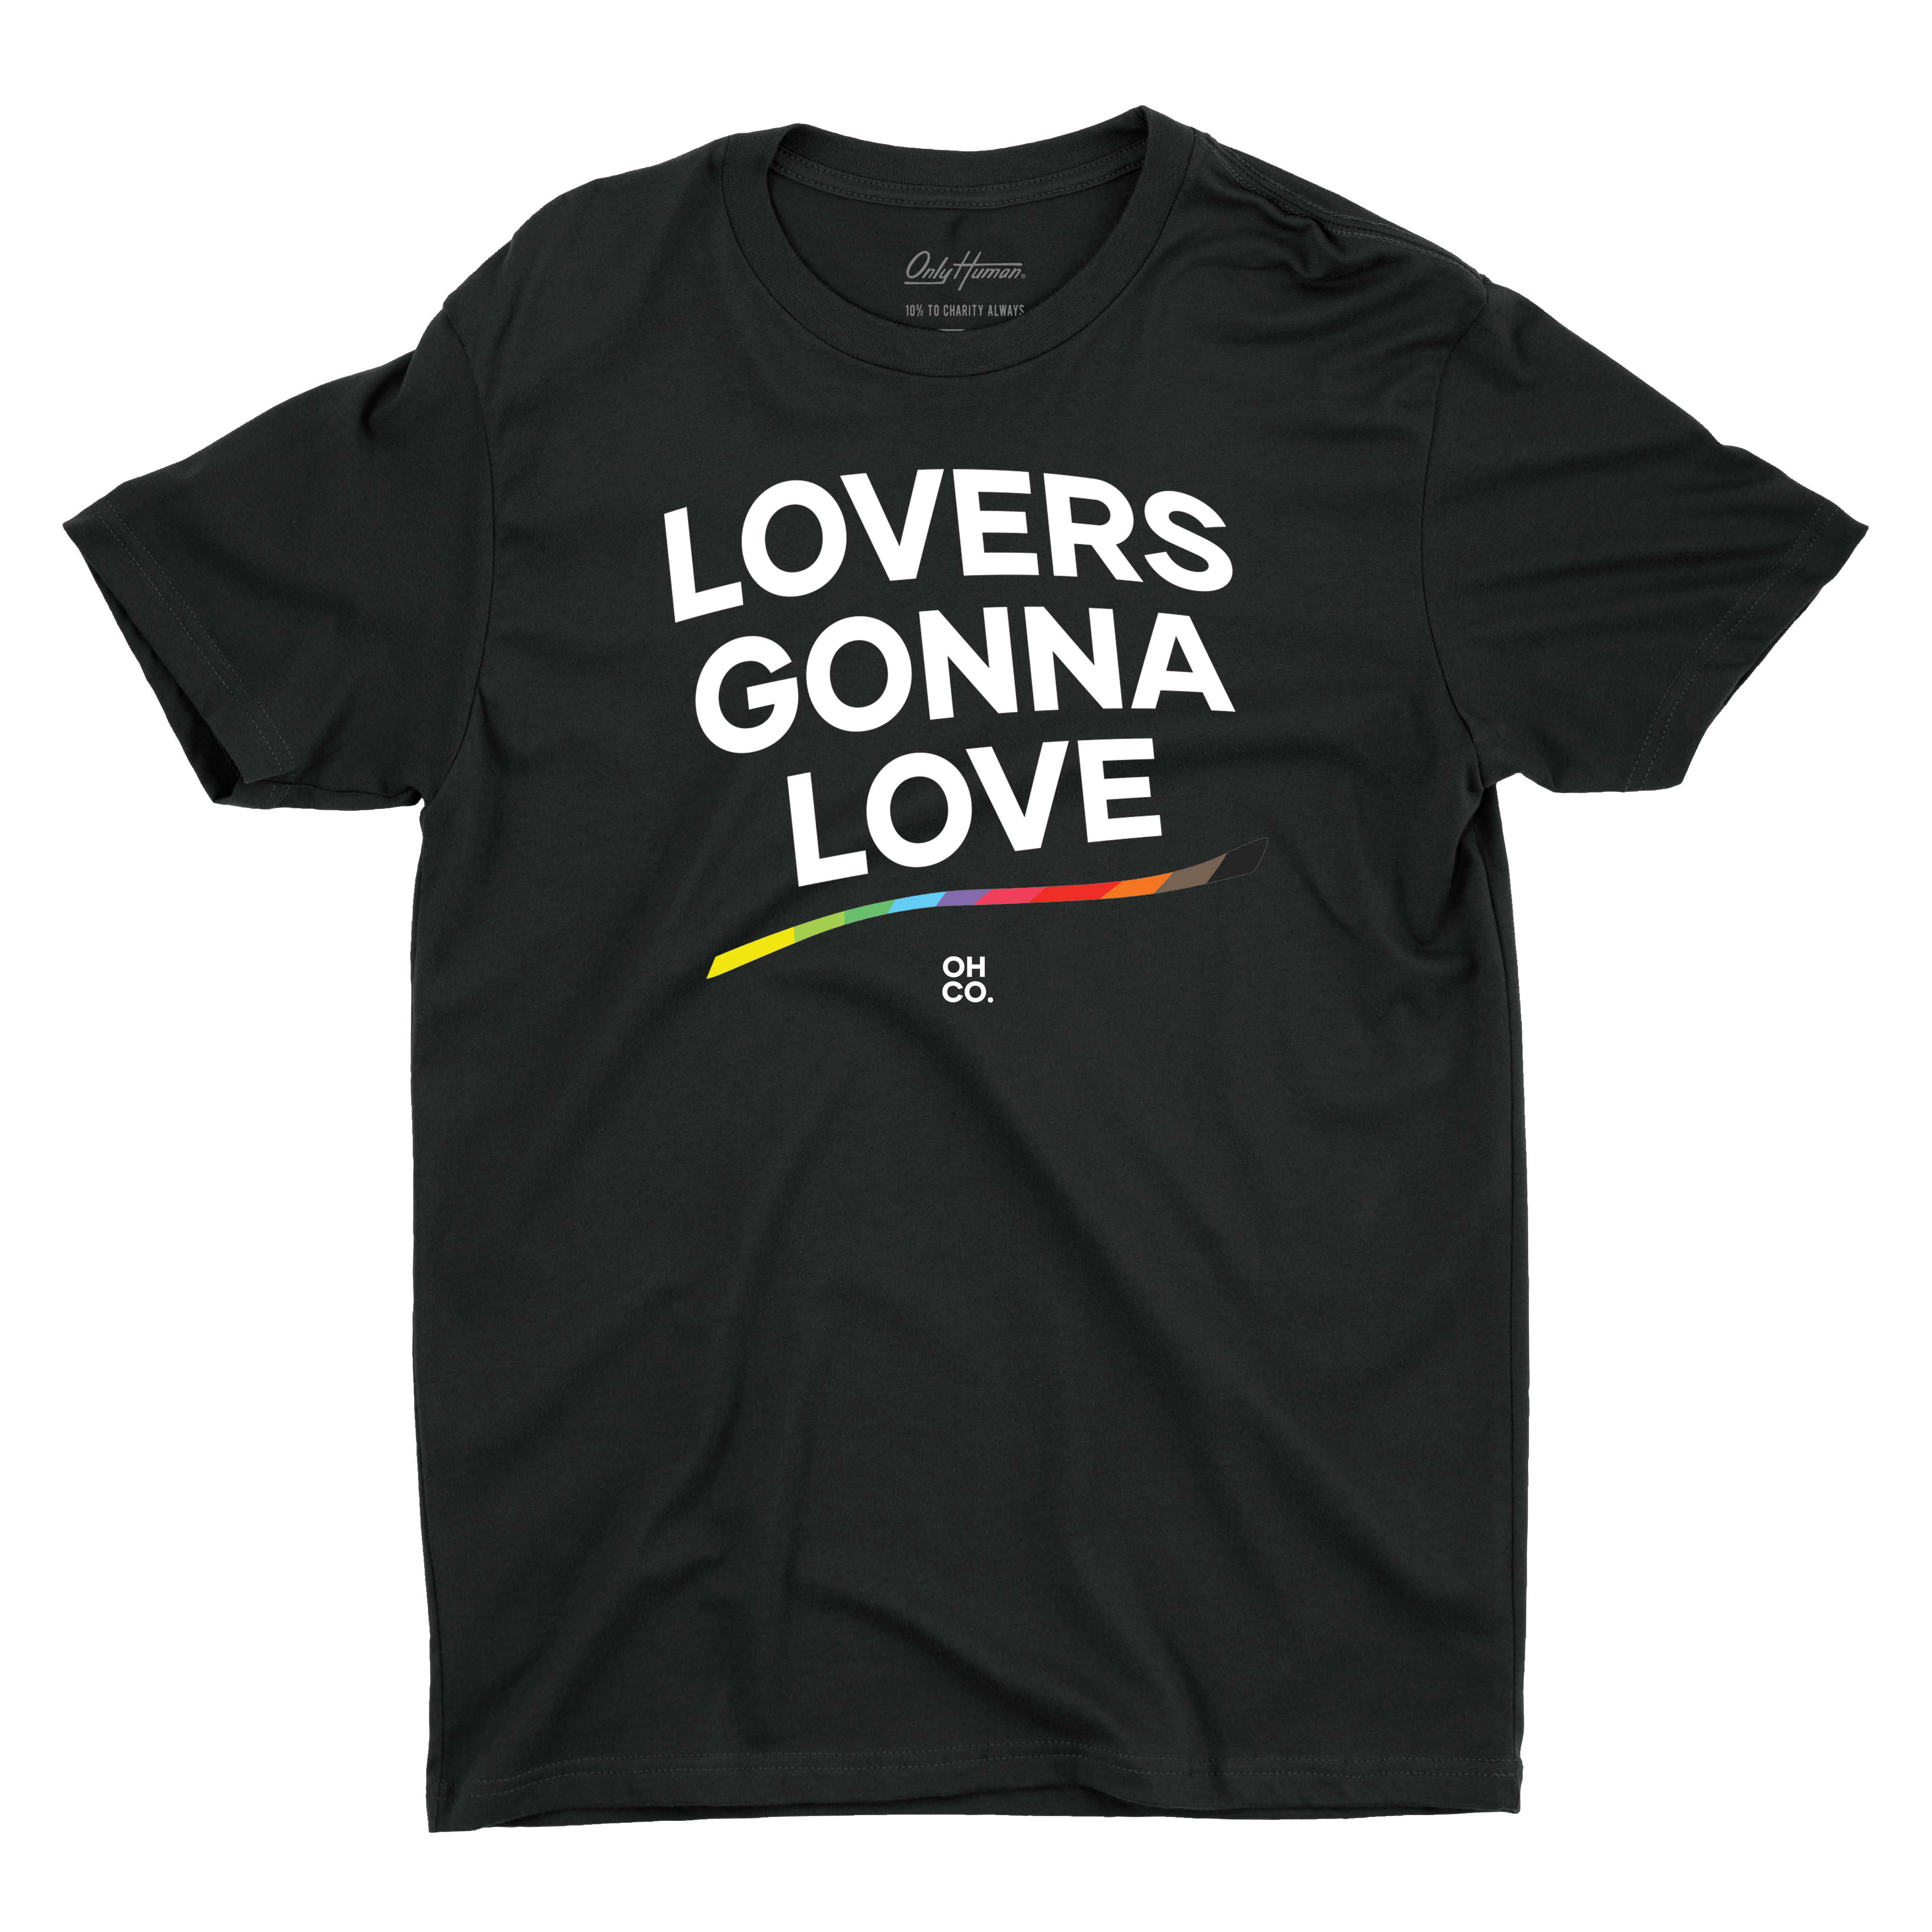 Lovers Gonna Love tee - Only Human